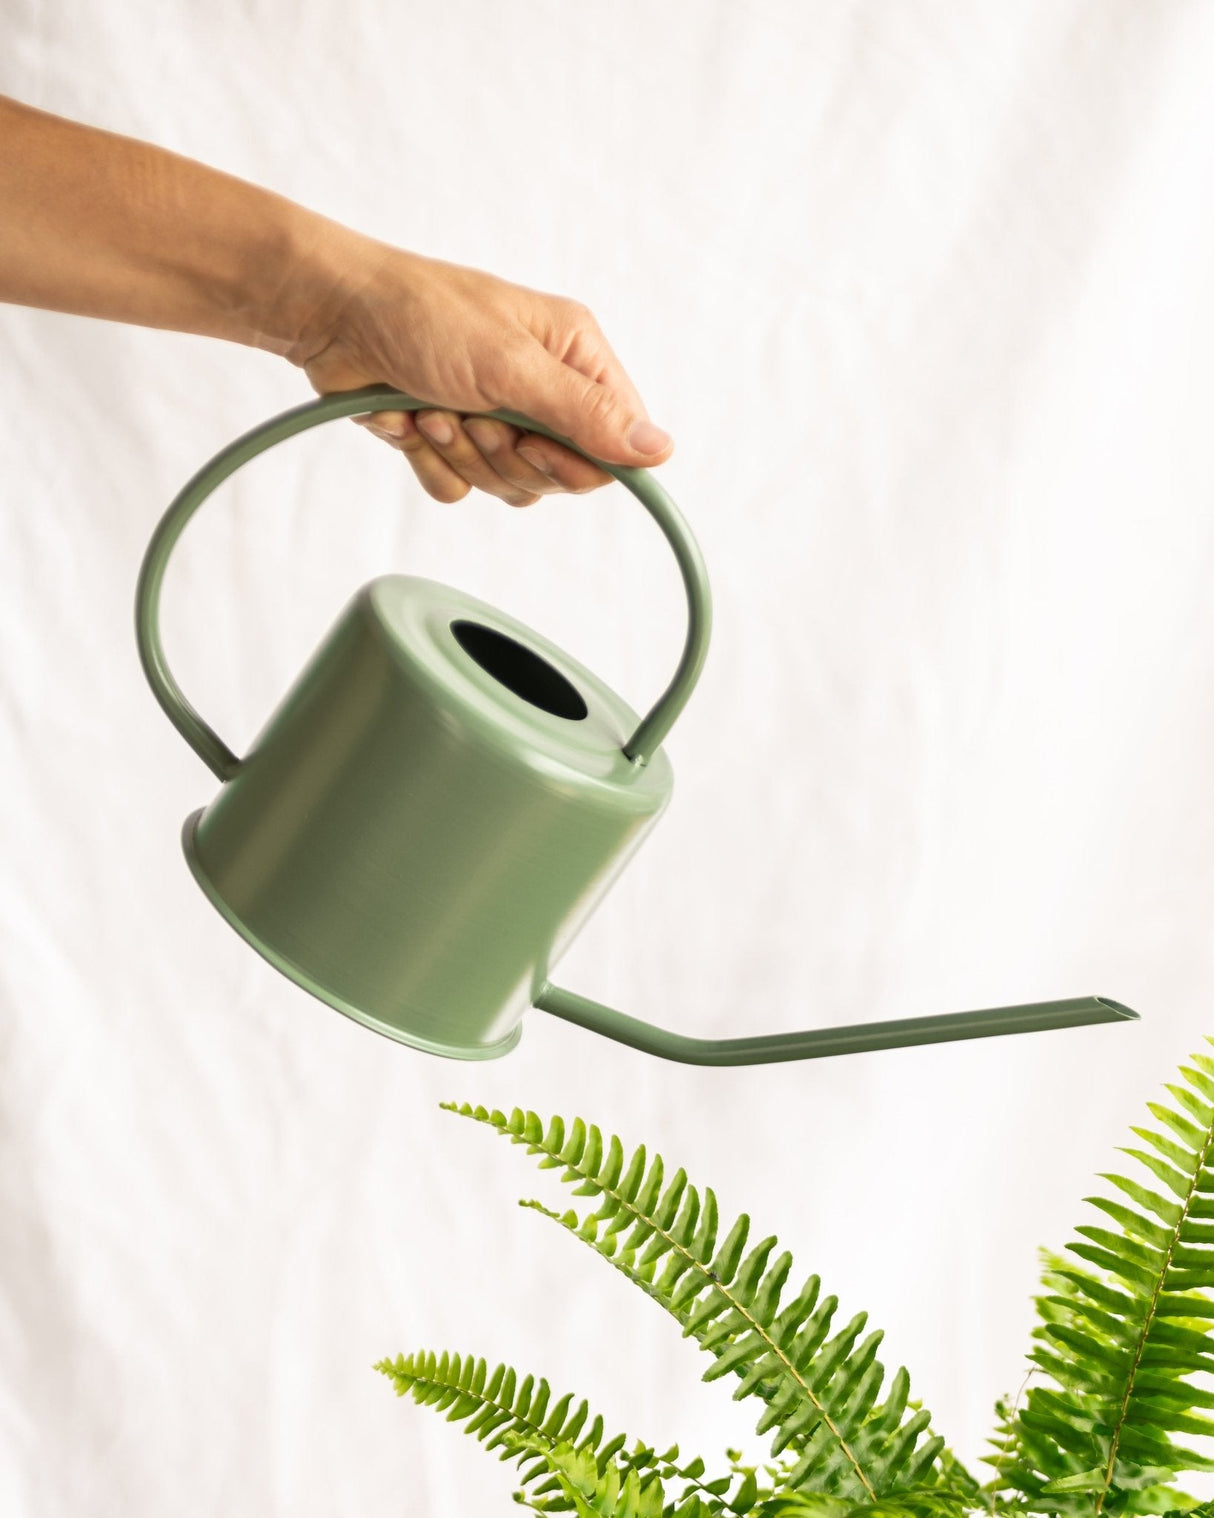 Green watering can